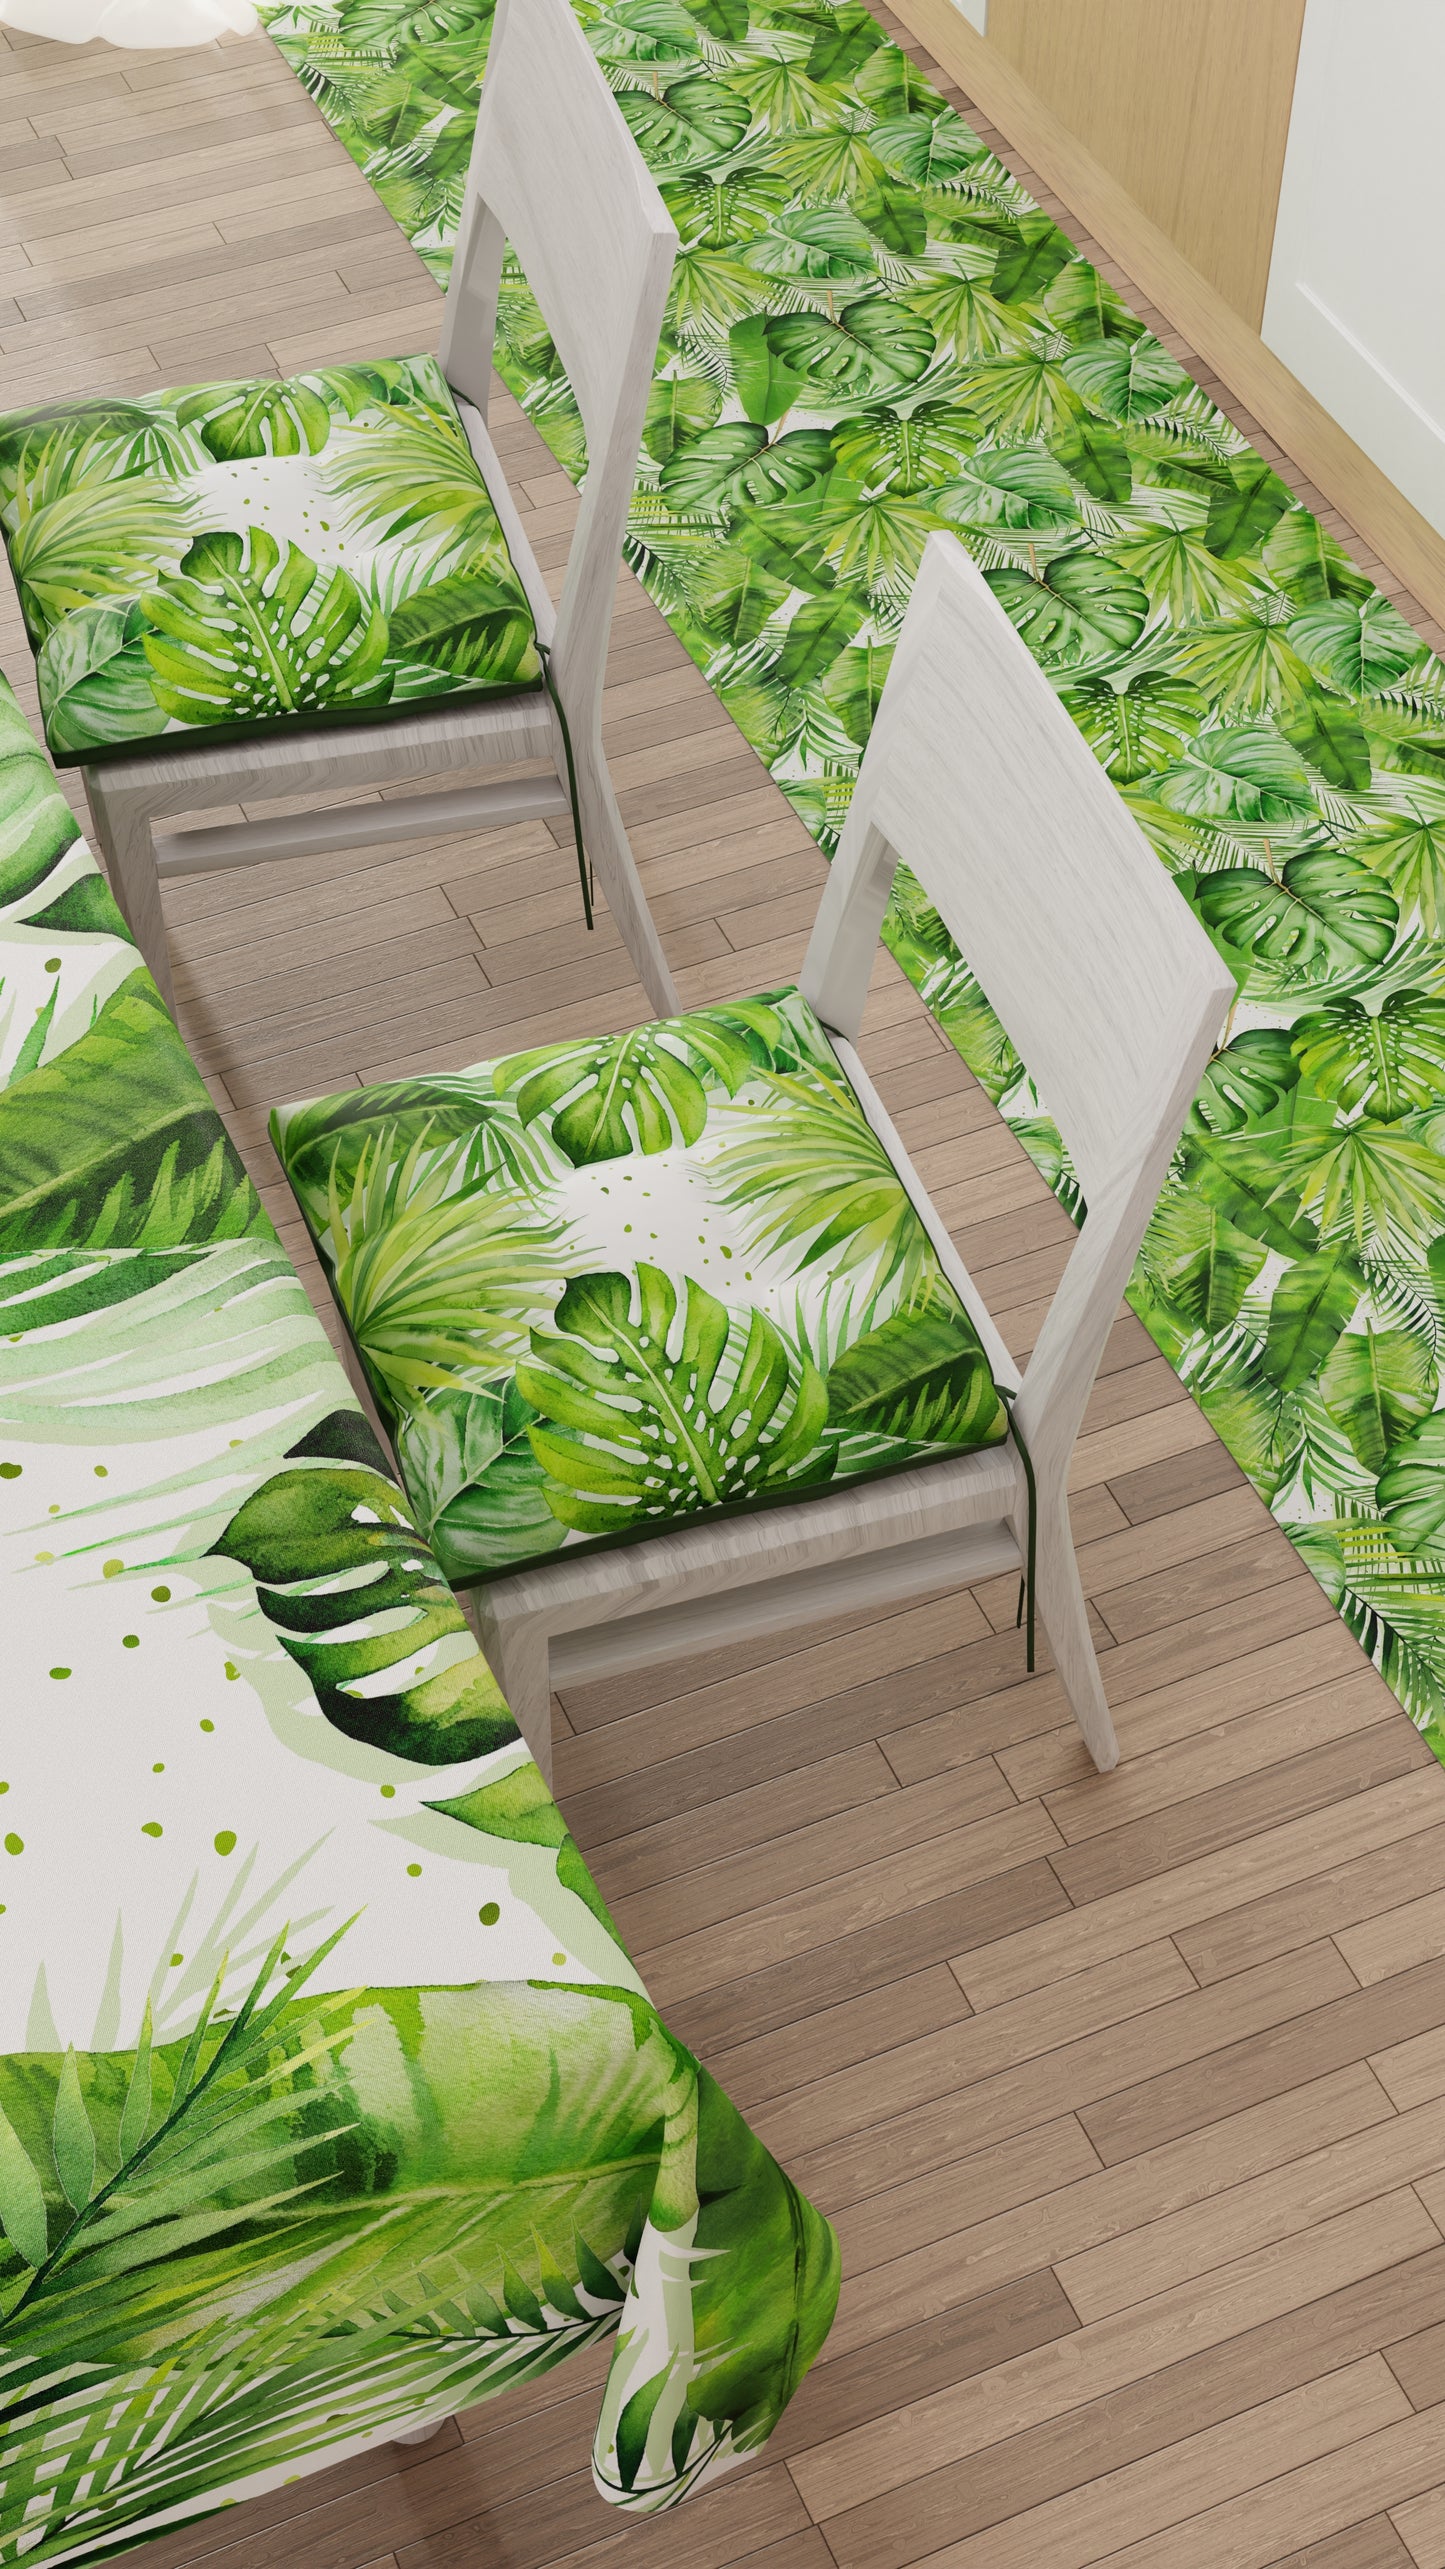 Stain-resistant tablecloth, kitchen table cover, tropical leaf